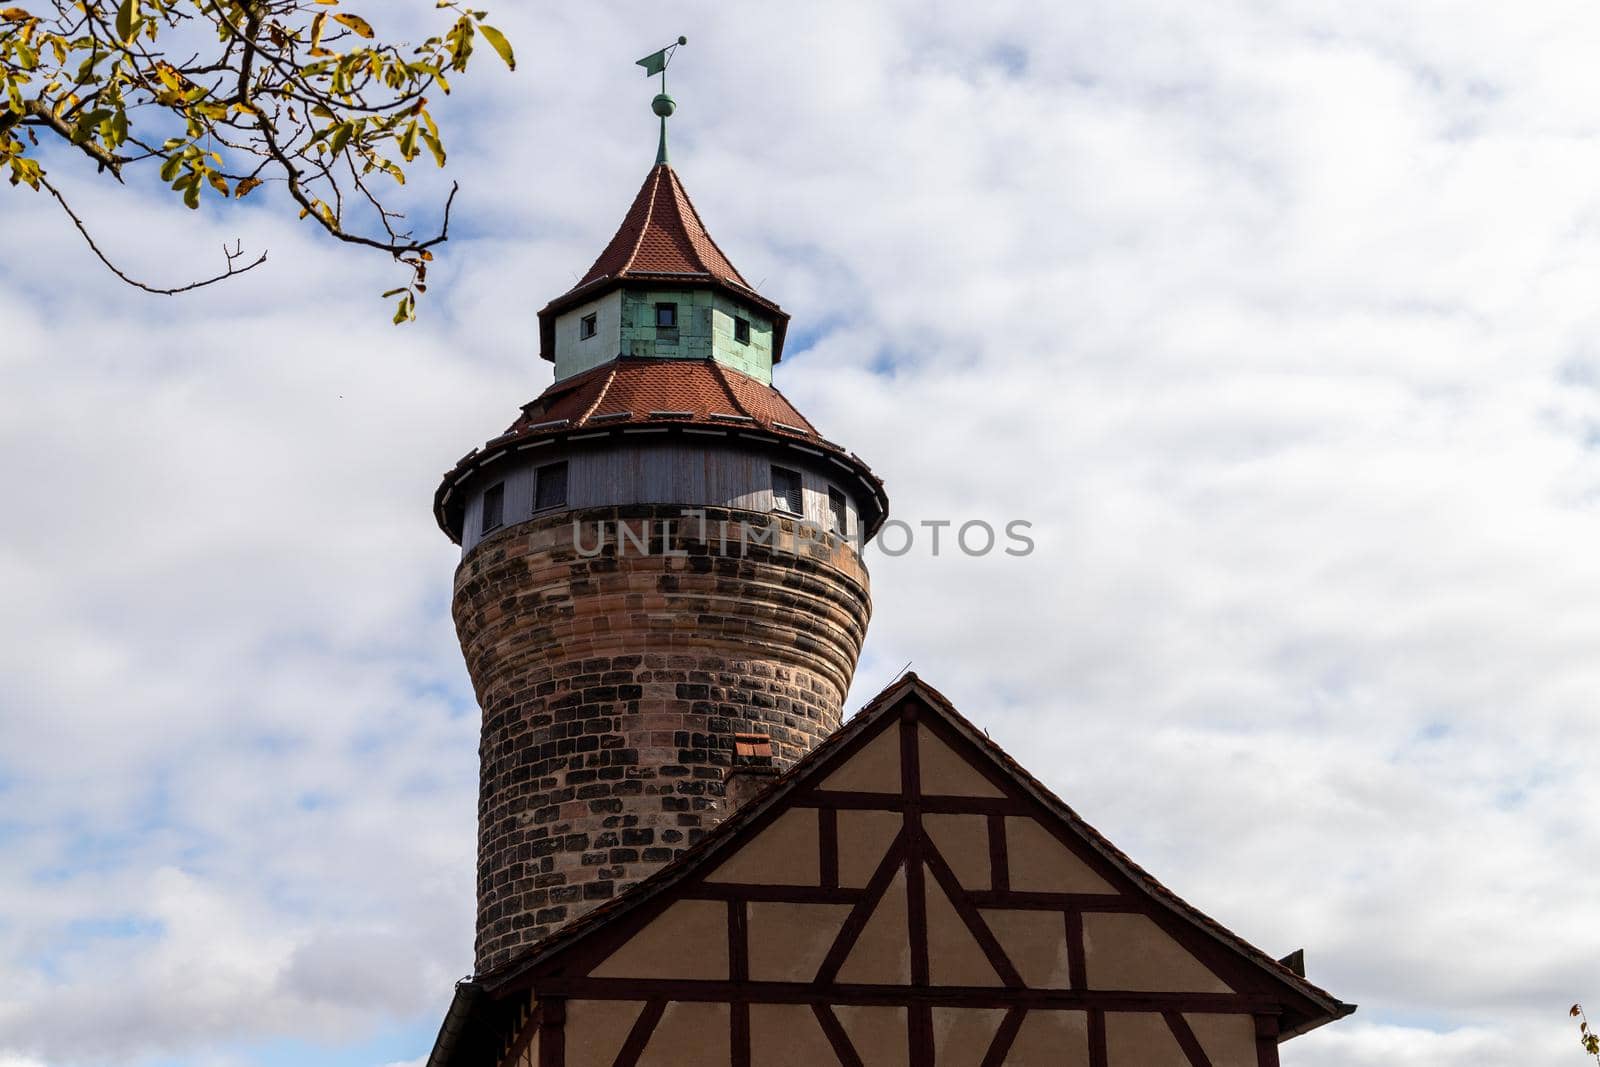 Historic wall and building of the Nuremberg castle, Bavaria, Germany by reinerc